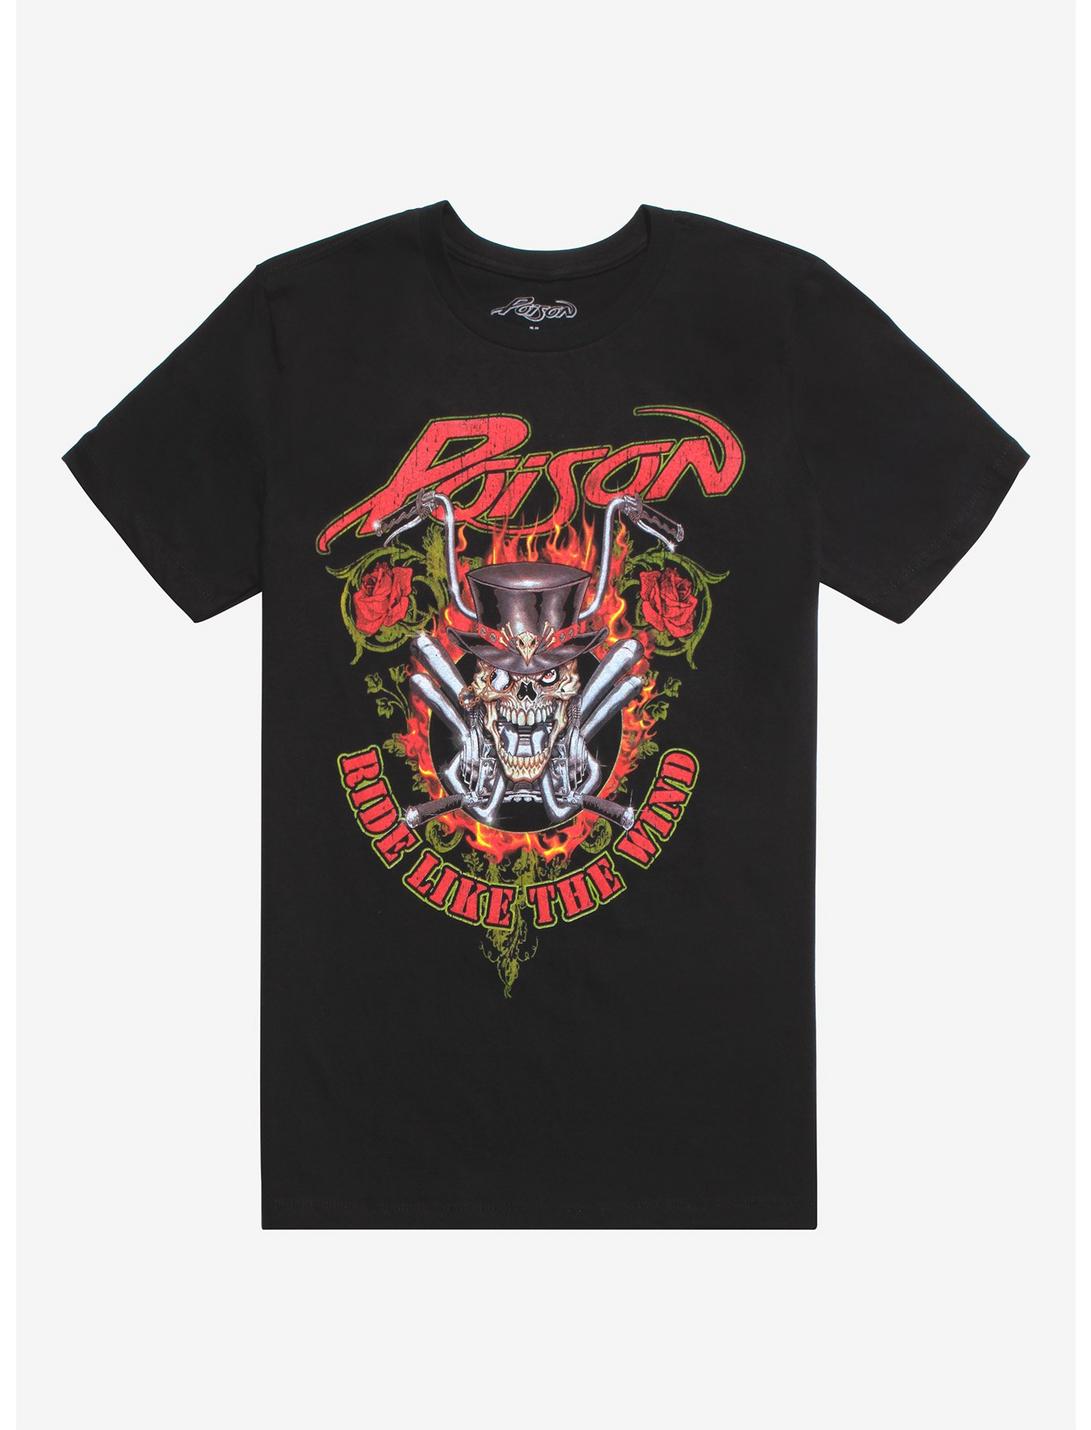 Poison Ride Like The Wind T-Shirt, BLACK, hi-res